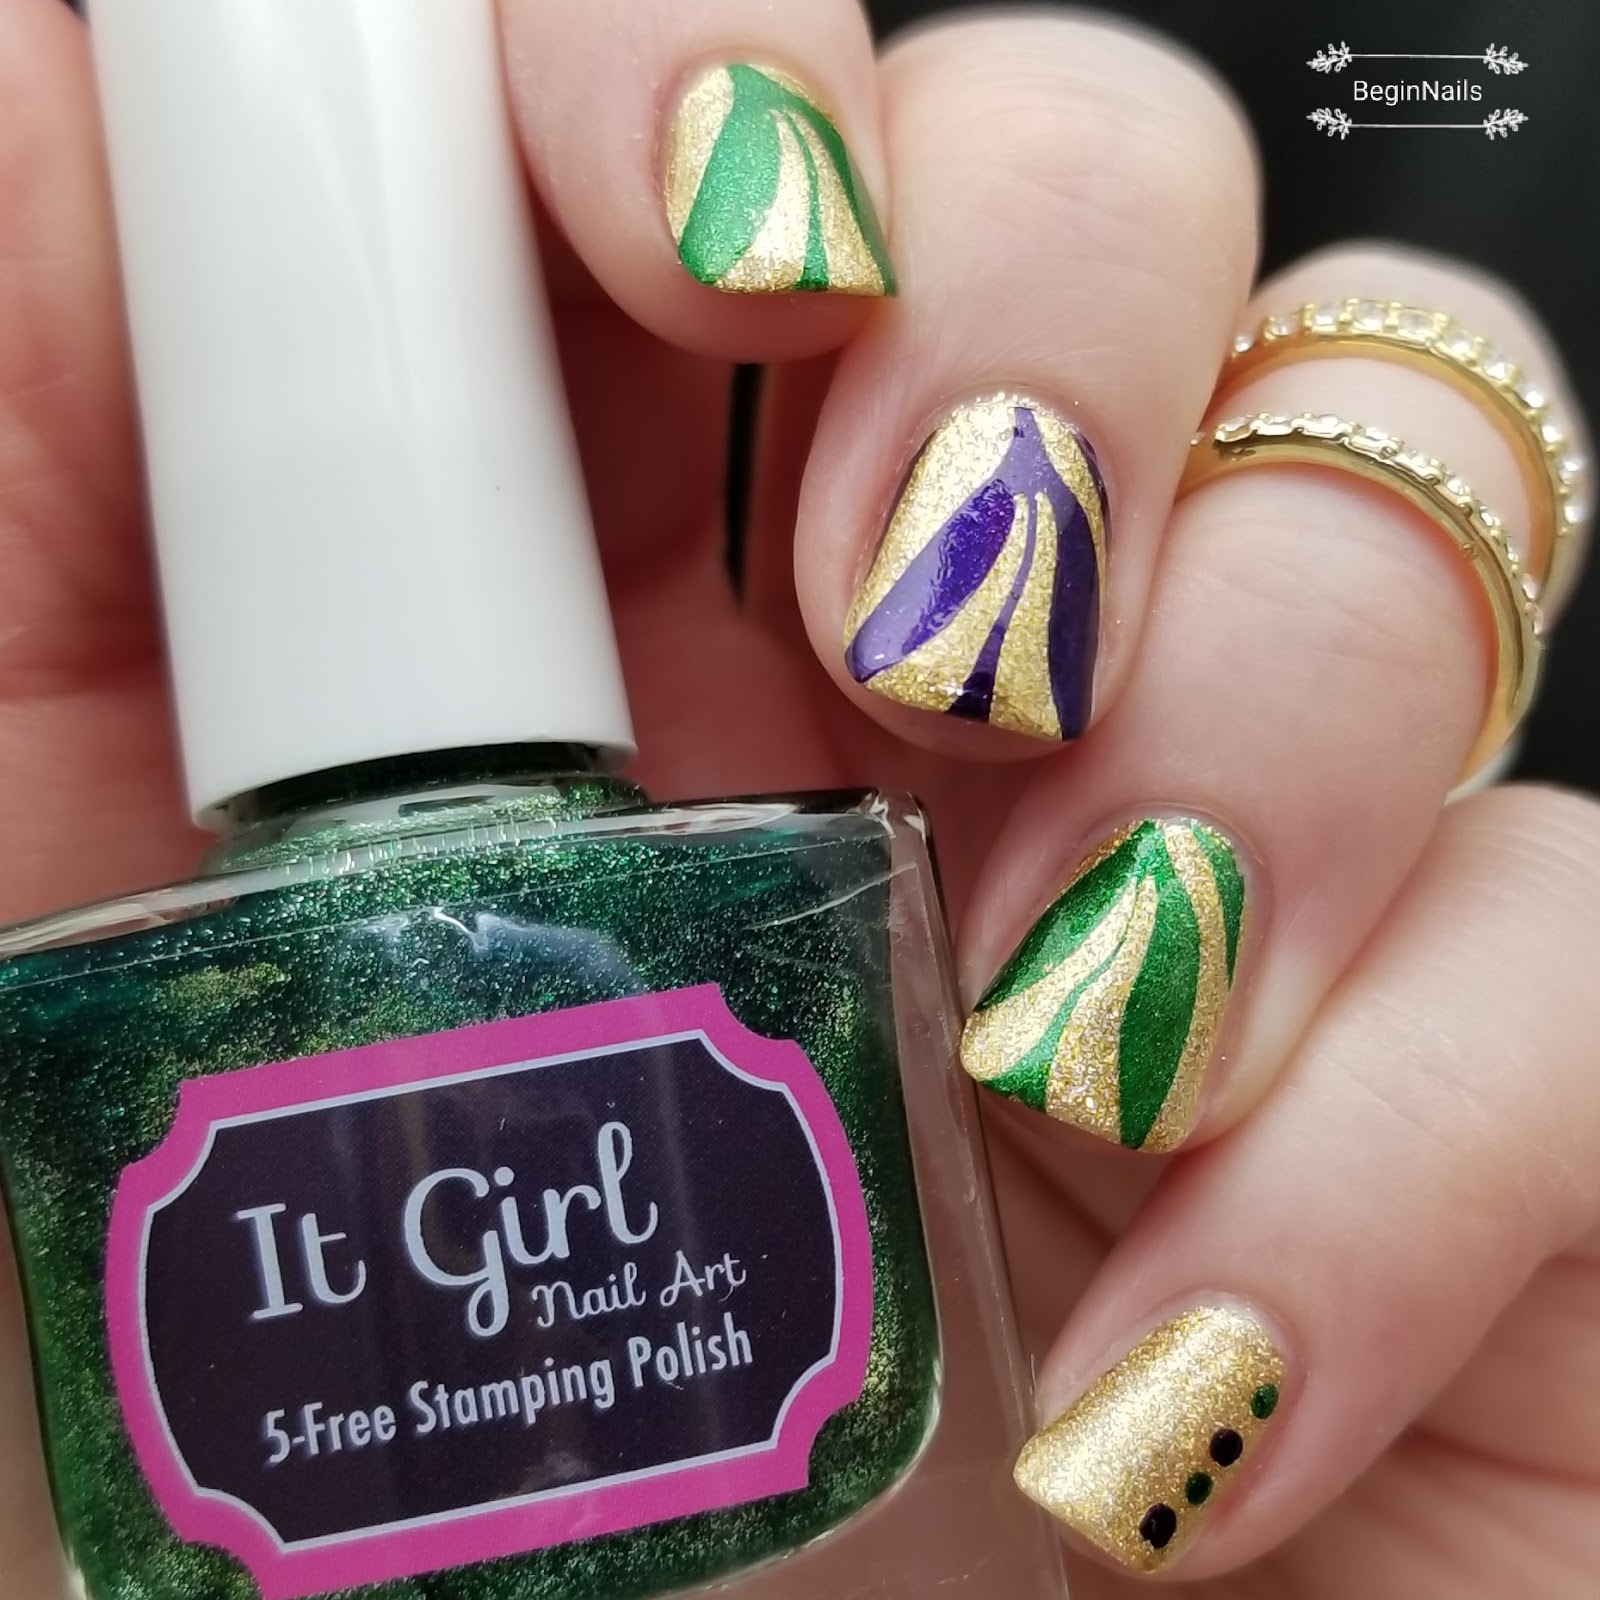 Let's Begin Nails: Purple, Gold and Green Nail Art (All About The Stamp)